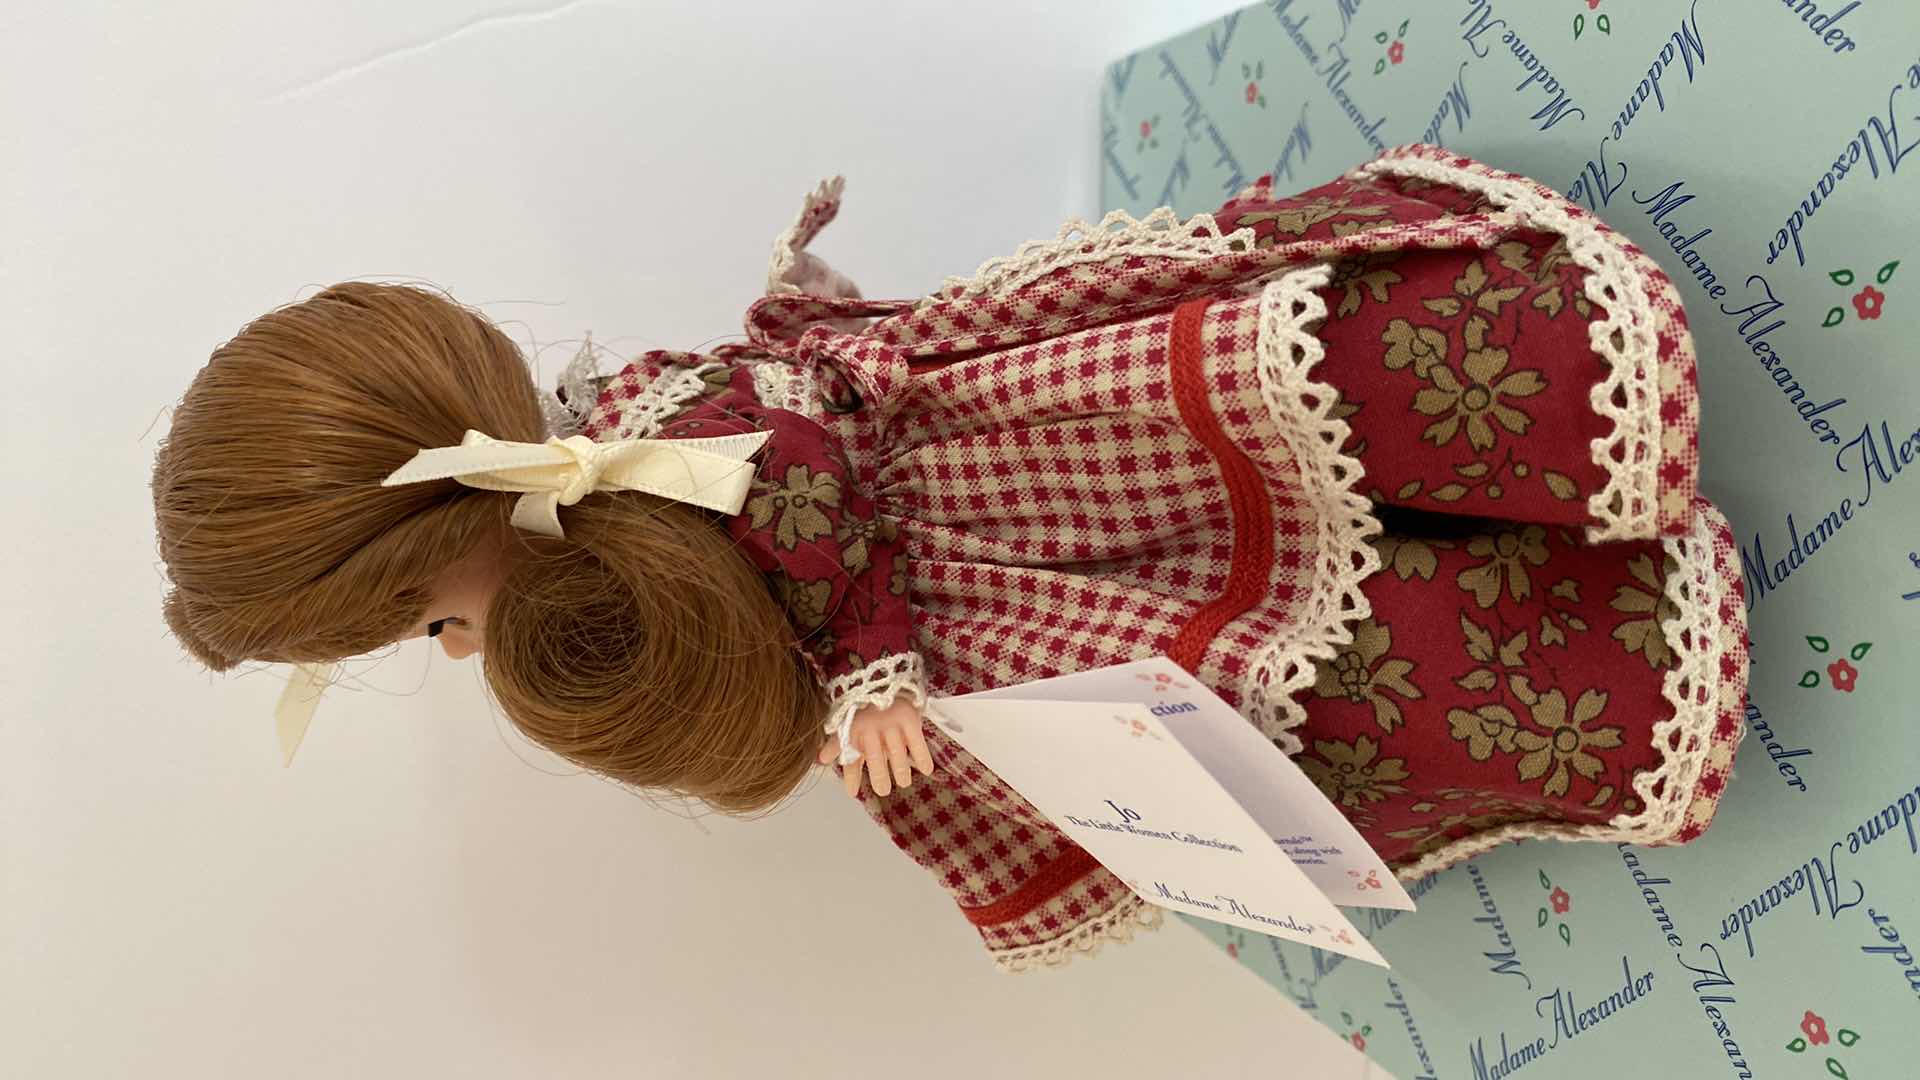 Photo 4 of MADAME ALEXANDER COLLECTIBLE LITTLE WOMEN JO 28140 H8” FROM FAO SCHWARZ WITH BOX